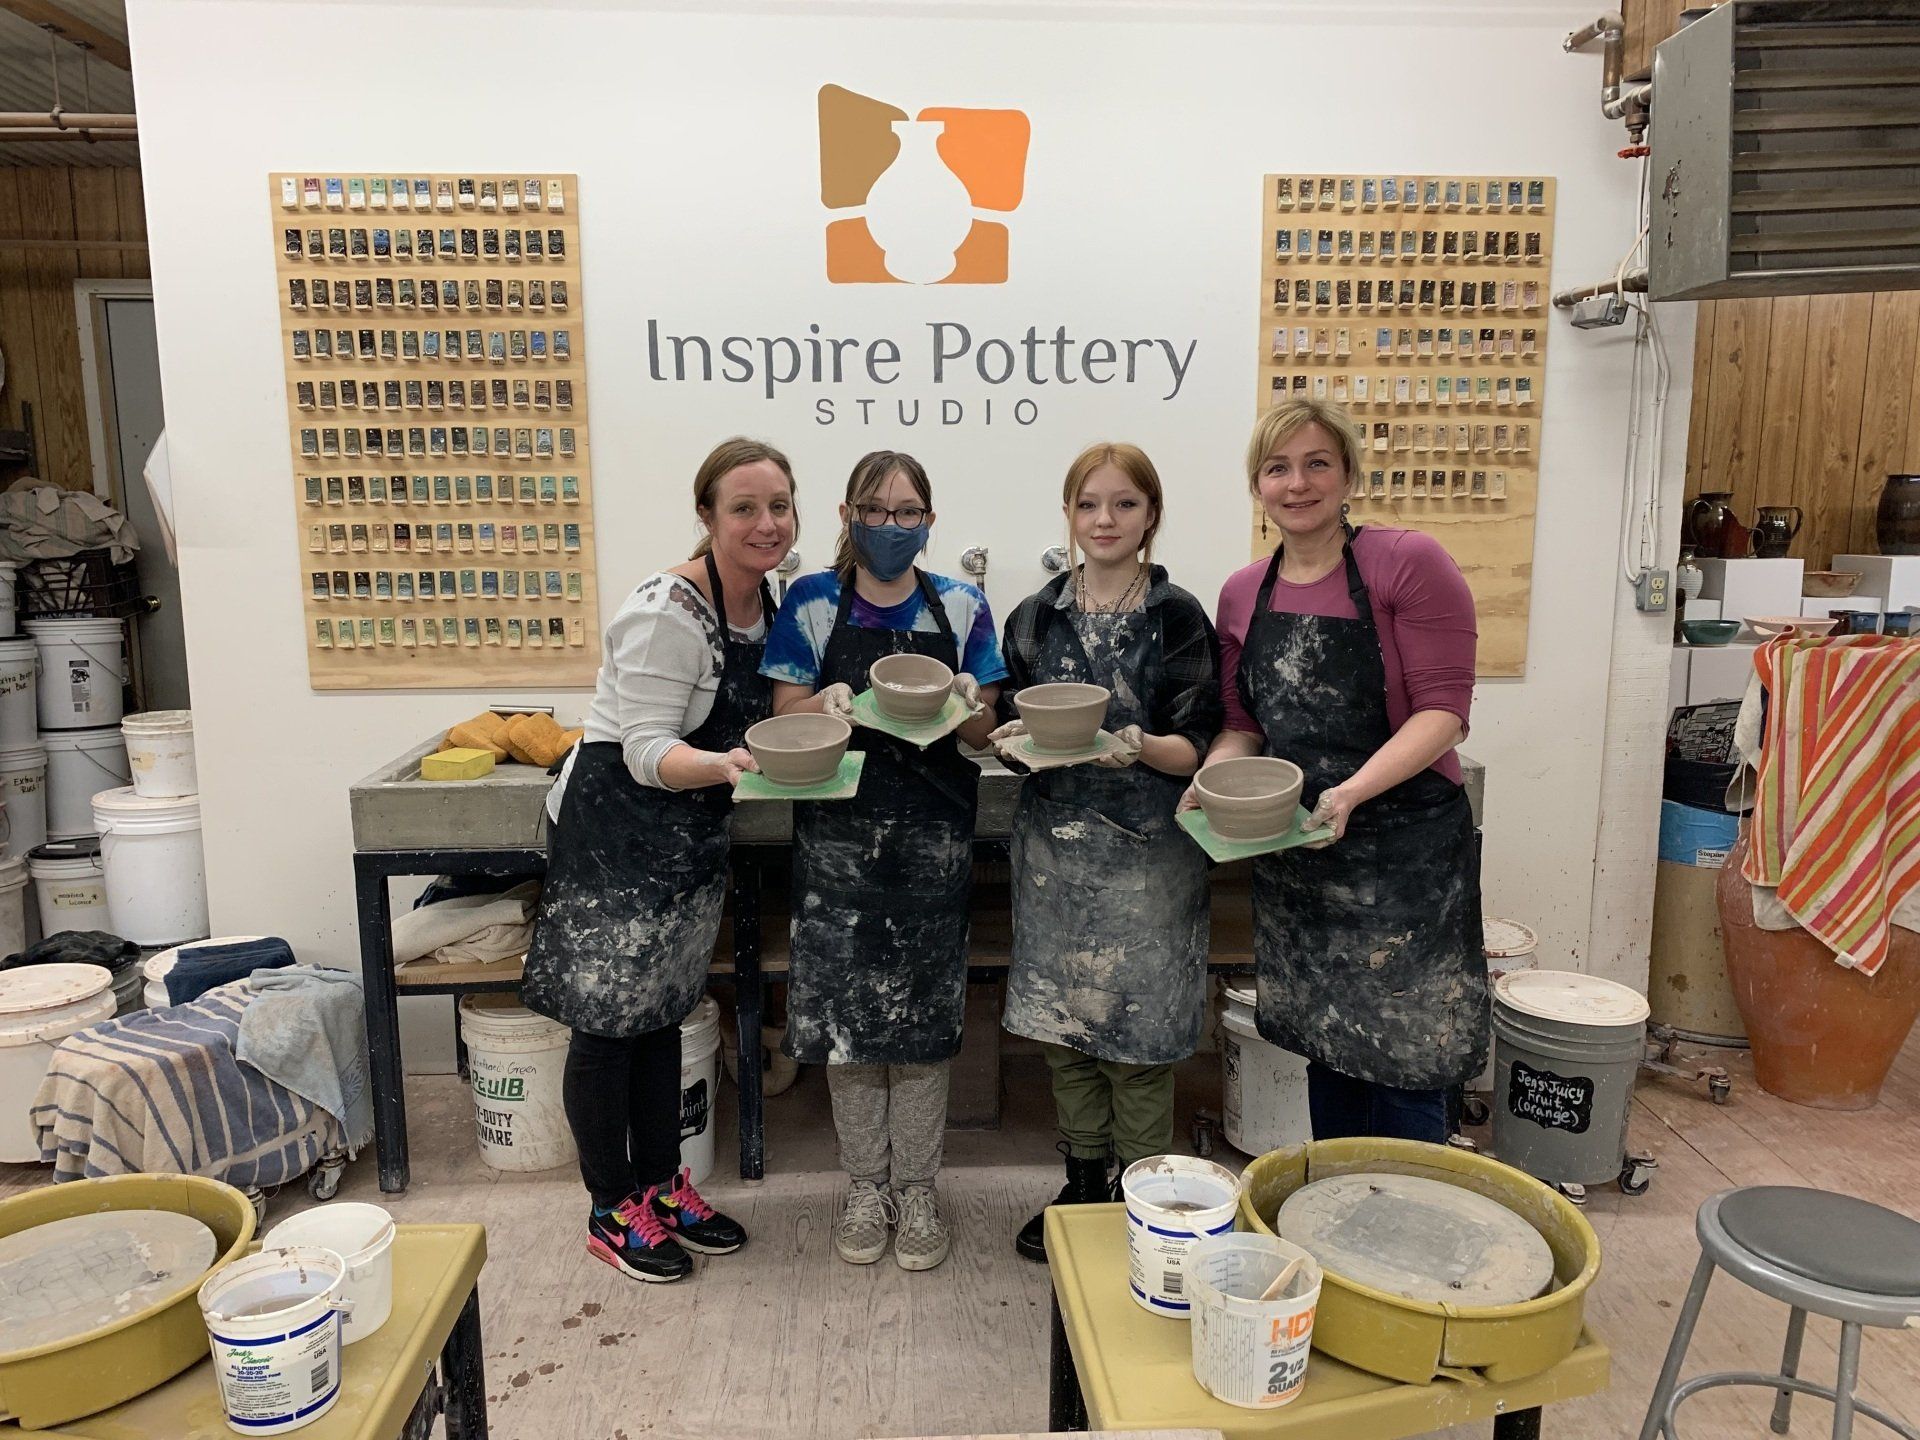 a group of women standing in front of a sign that says inspire pottery studio